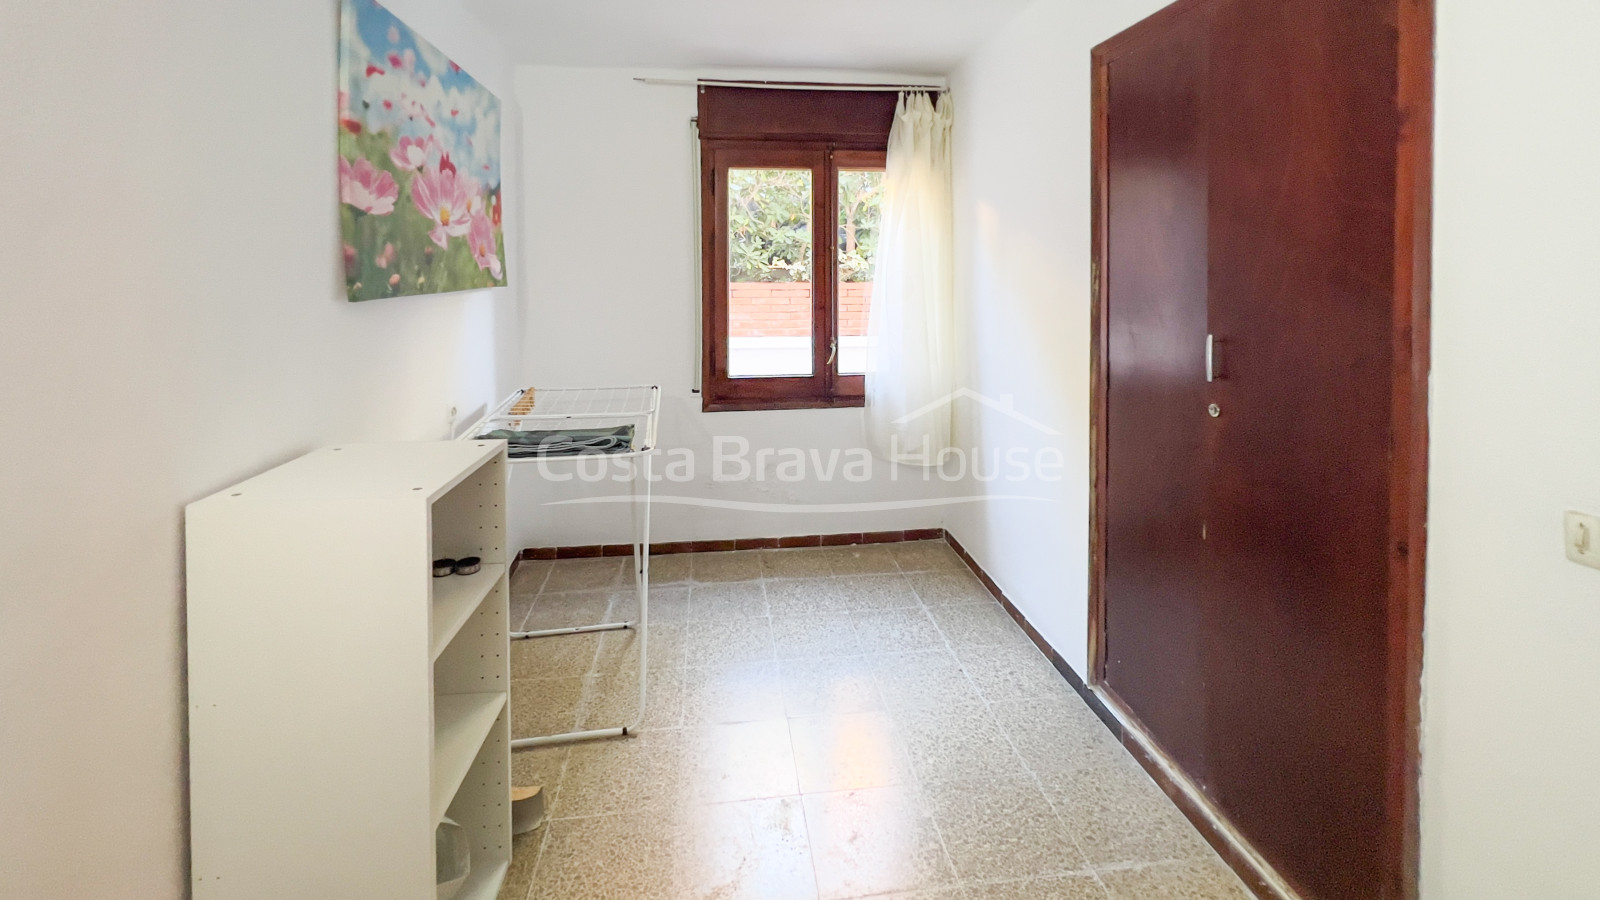 Apartment with terrace and garden for sale in Calella Palafrugell